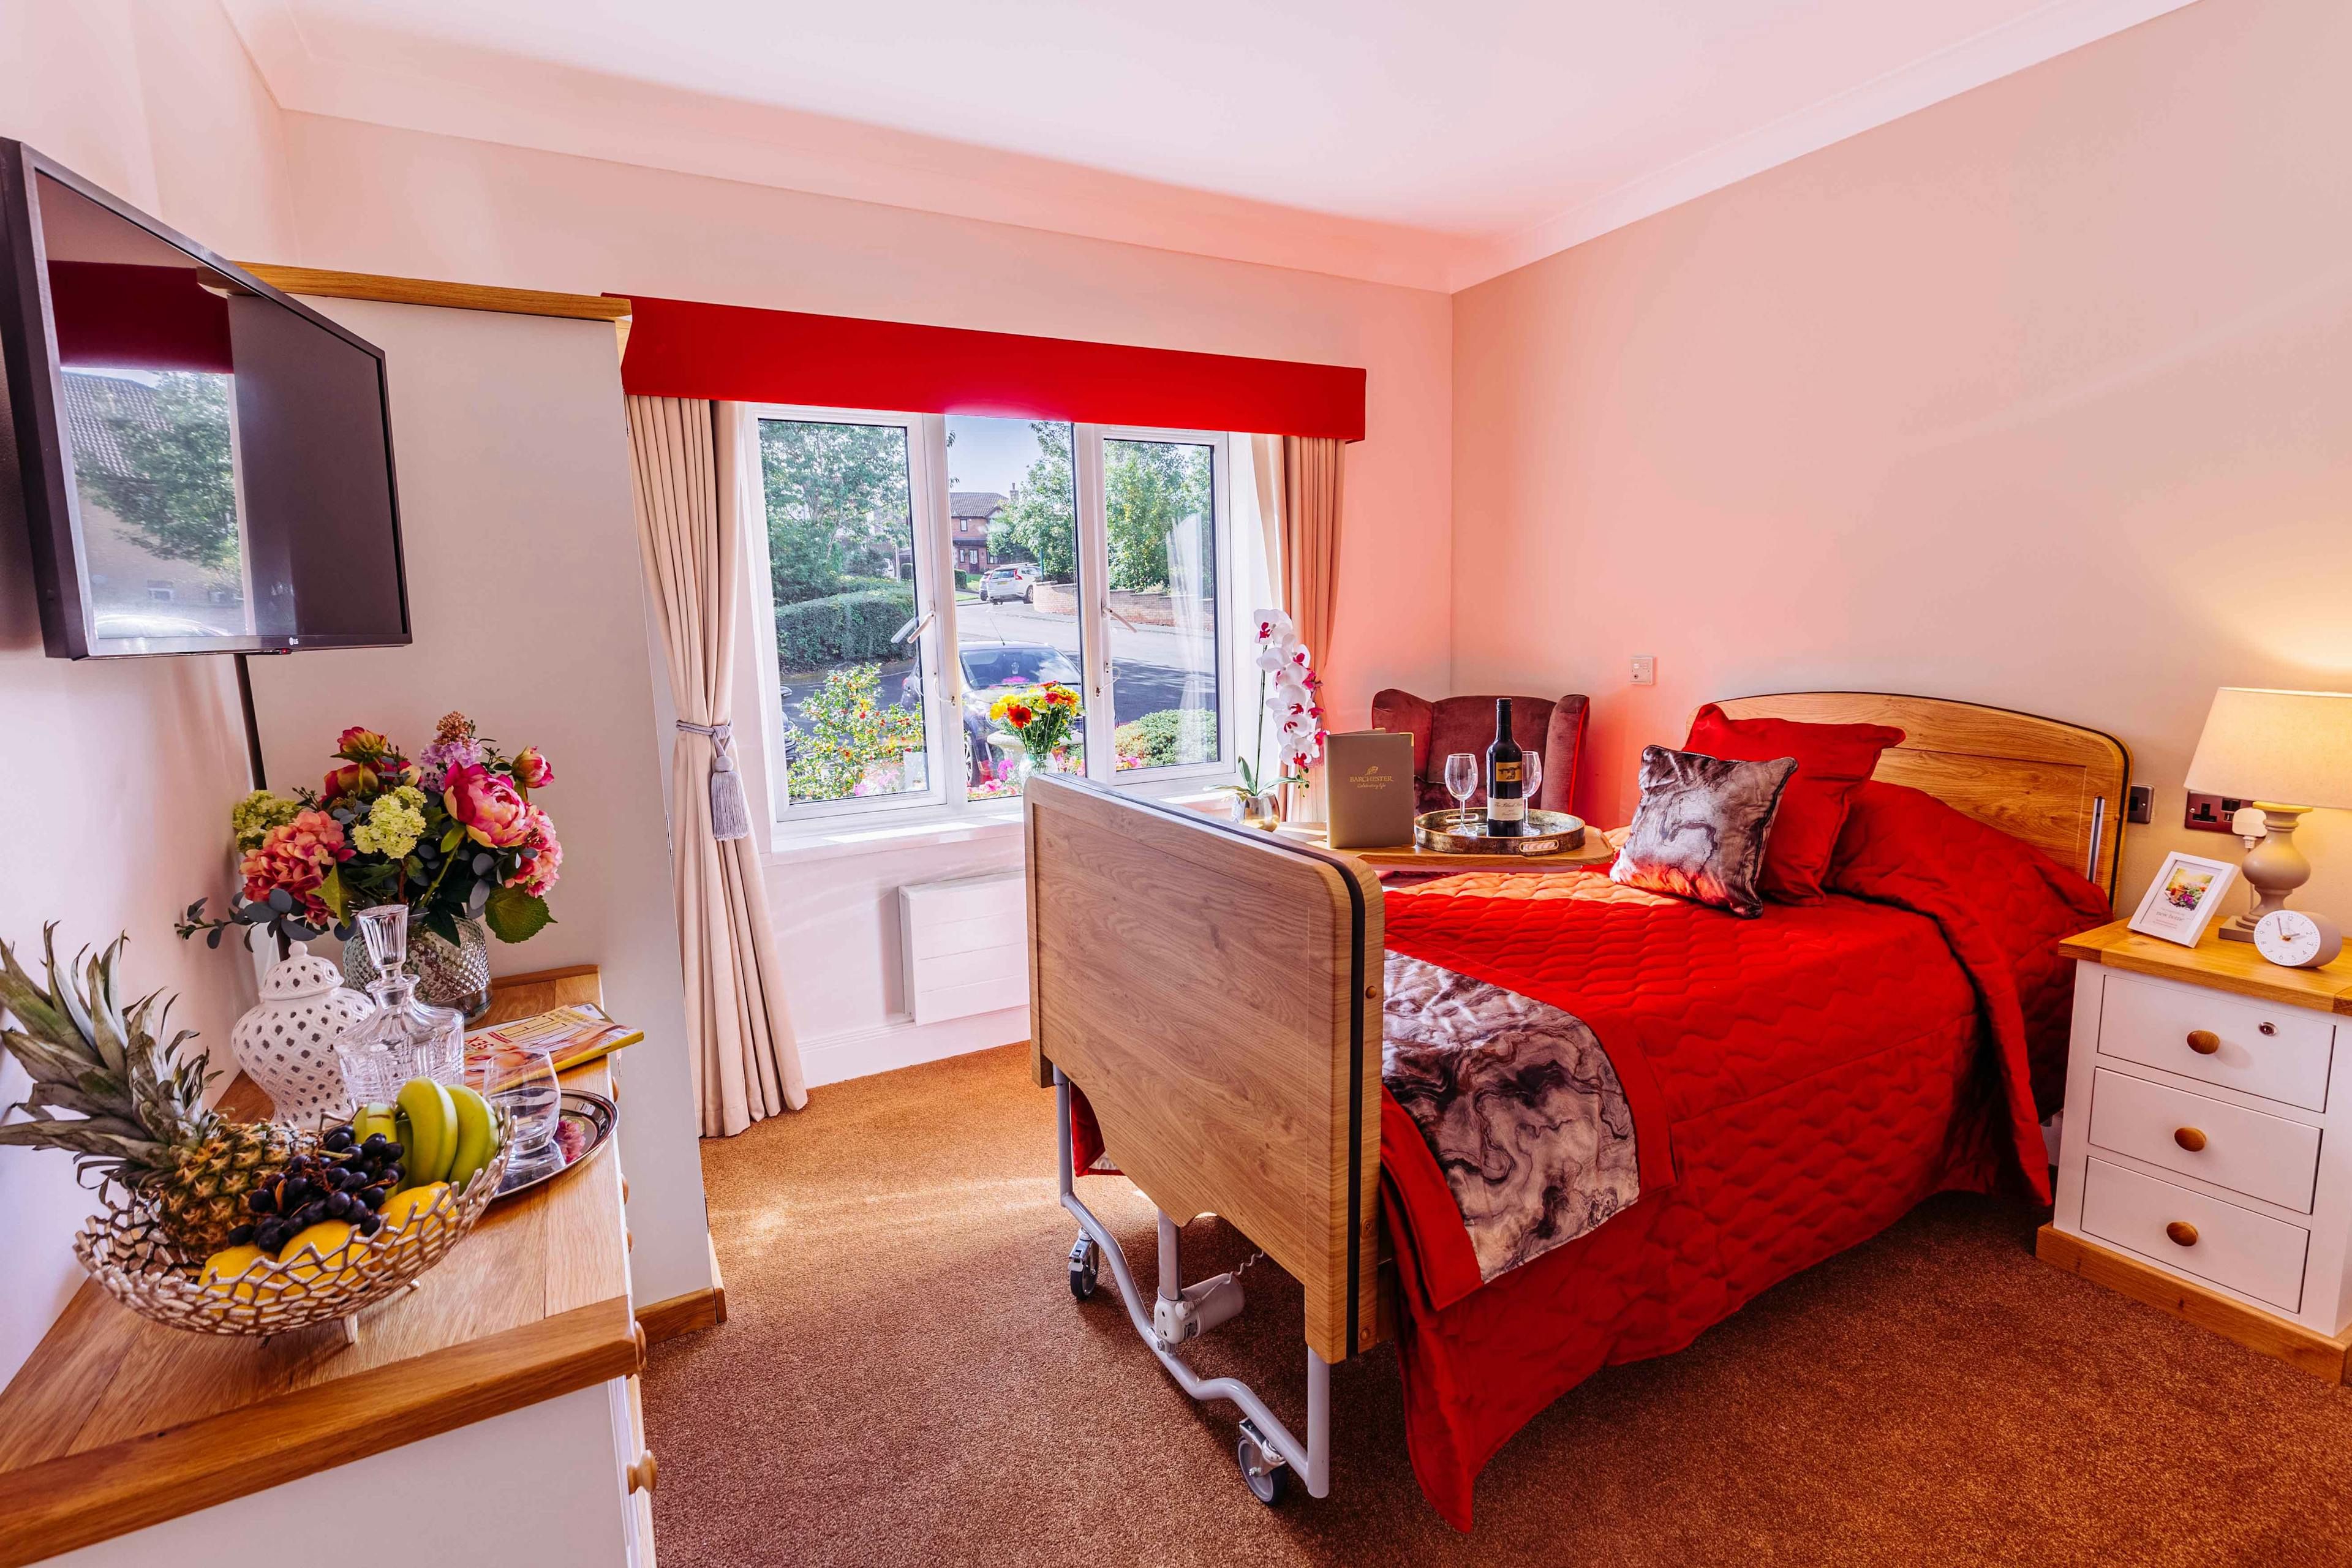 Bedroom at  Lanercost House Care Home in Carlisle, Cumbria